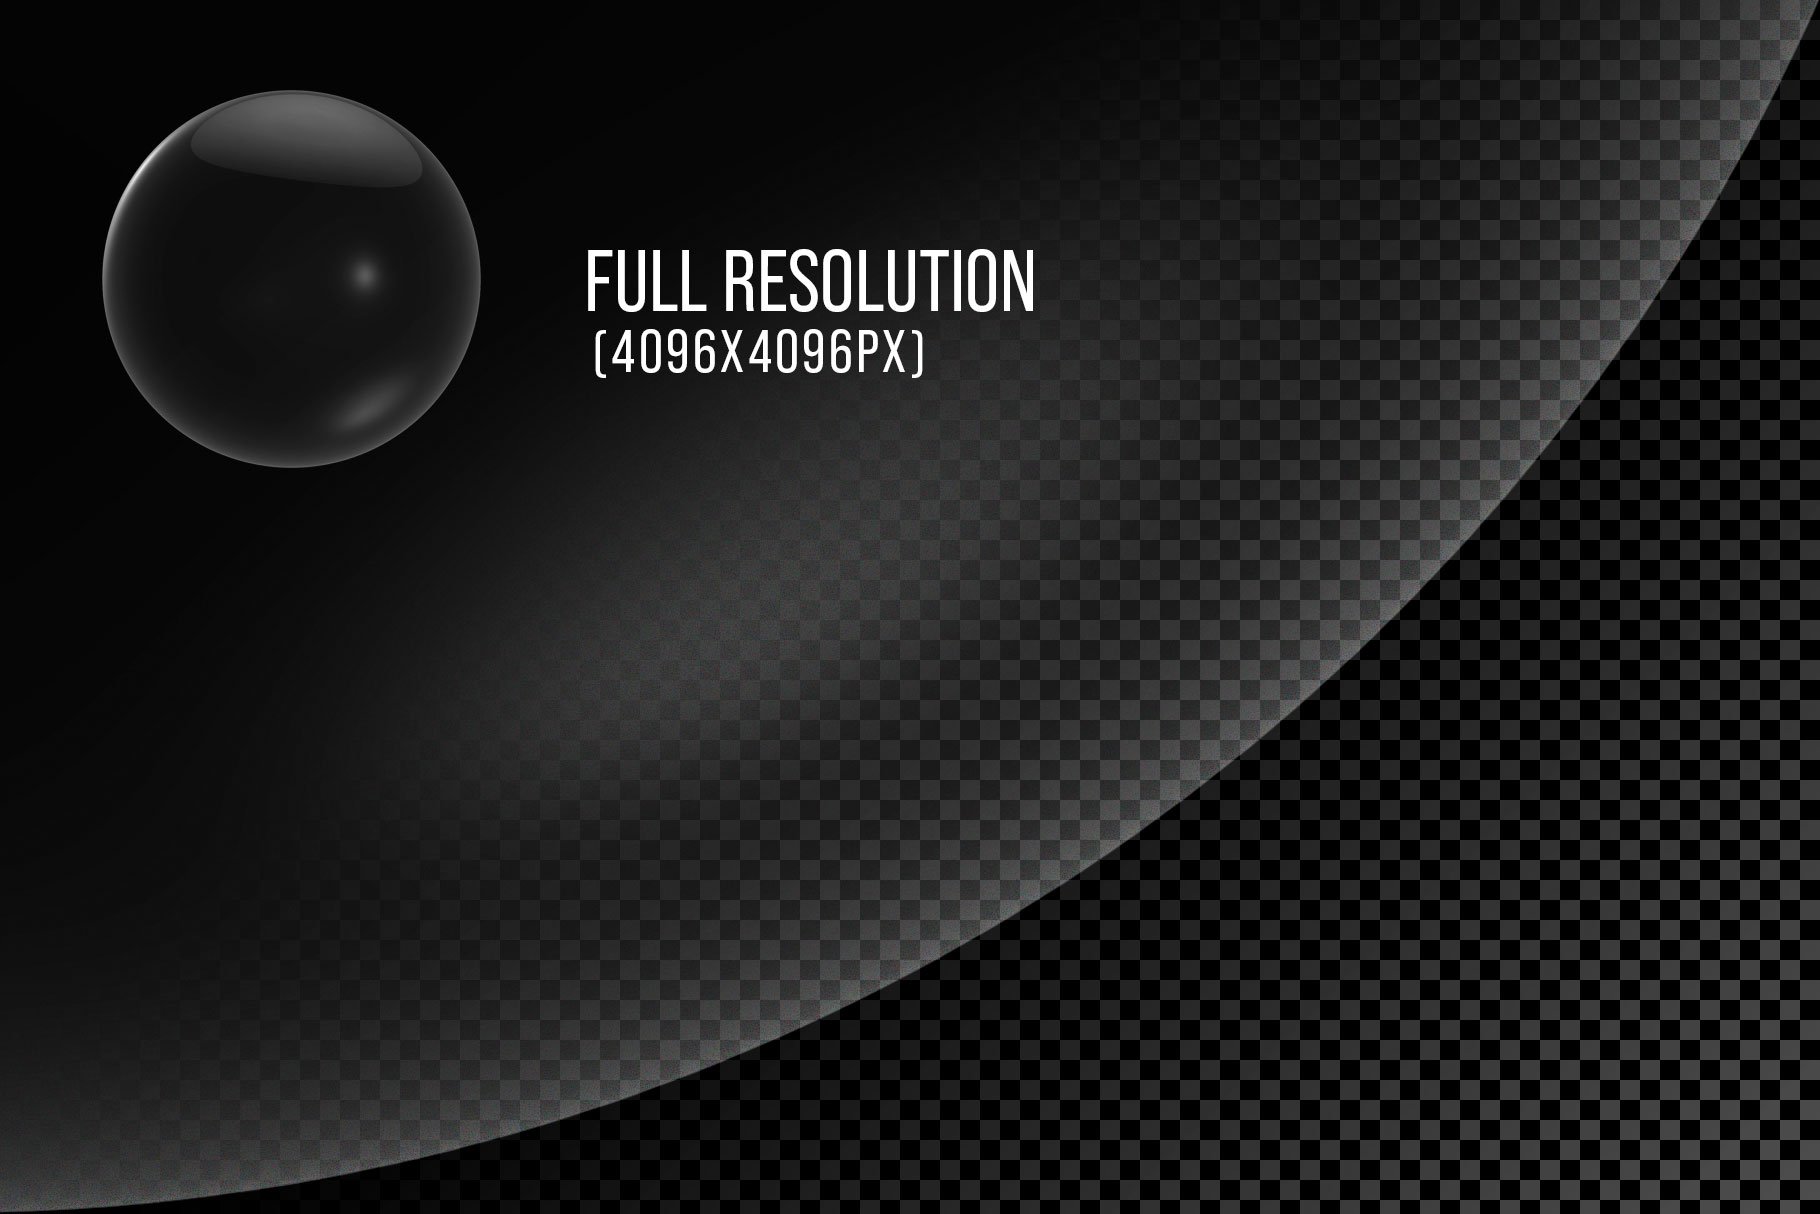 50 sphere ps brushes and pngs preview 02 661